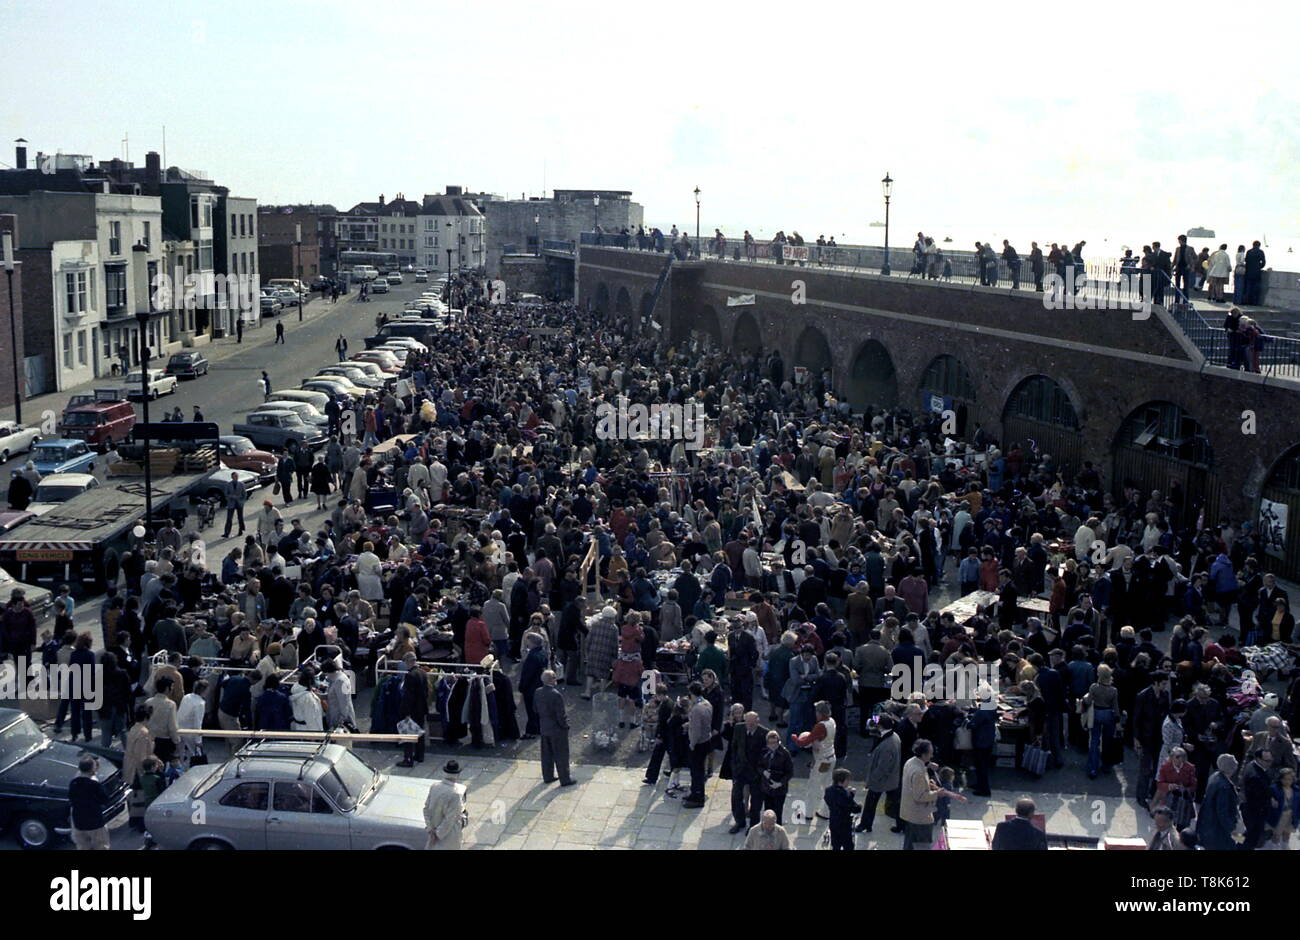 AJAXNETHOTO. 1968. OLD PORTSMOUTH, ENGLAND. - OPEN AIR MARKET AND ARCHES ART EXHIBITION, BROAD STREET. PHOTO:JONATHAN EASTLAND/AJAX REF:EPS 120104 11 Stock Photo